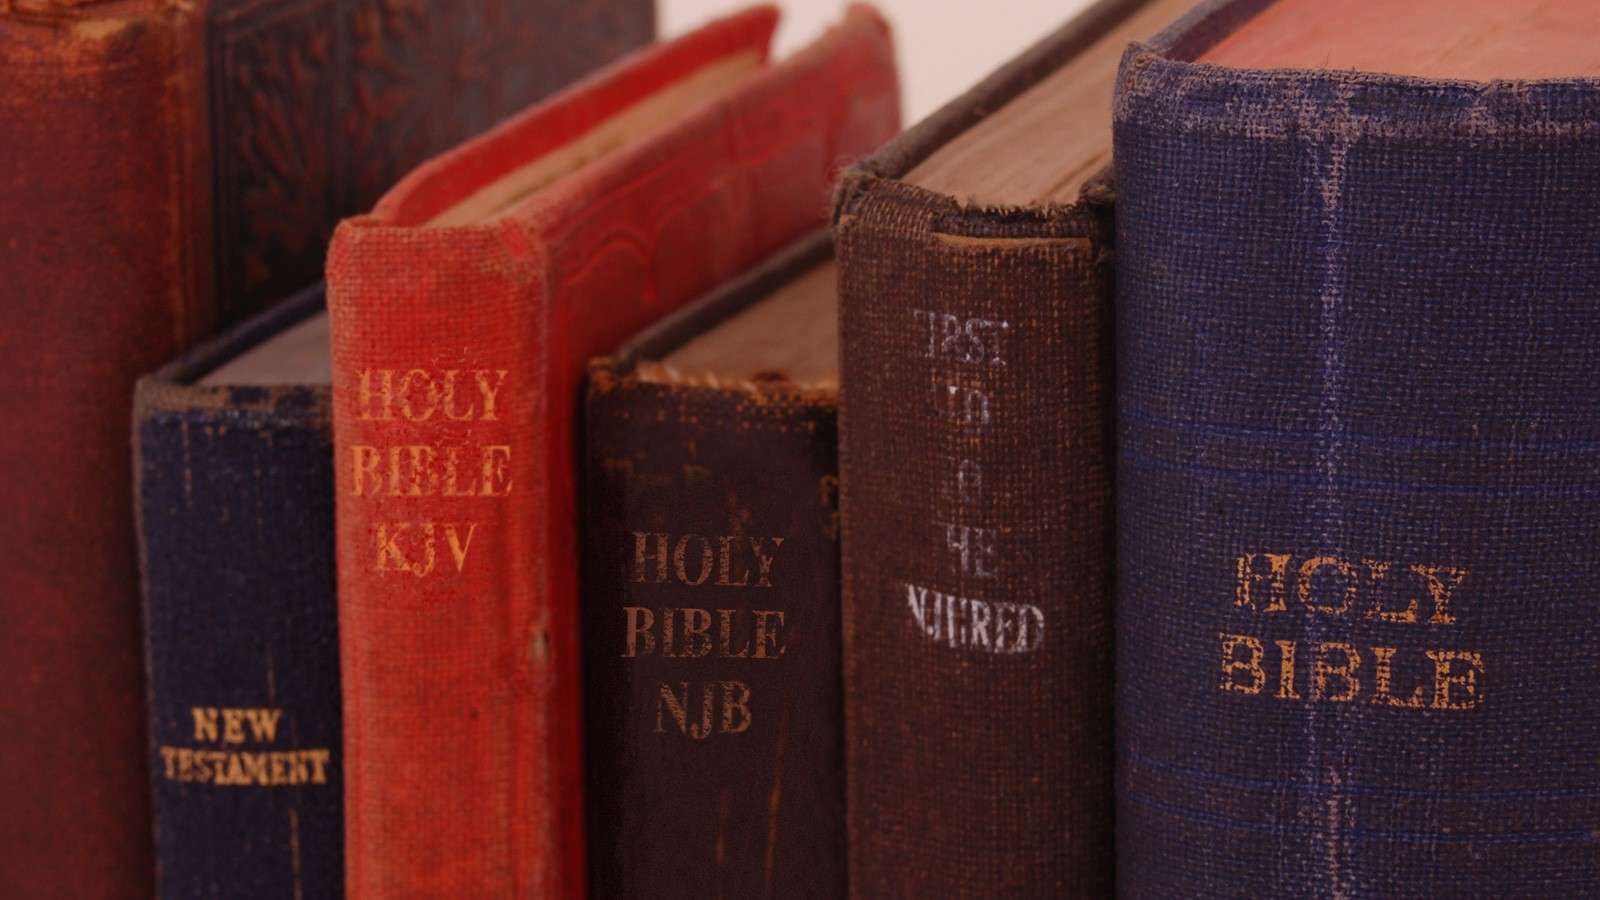 Bible Abbreviations for Books and Common Versions